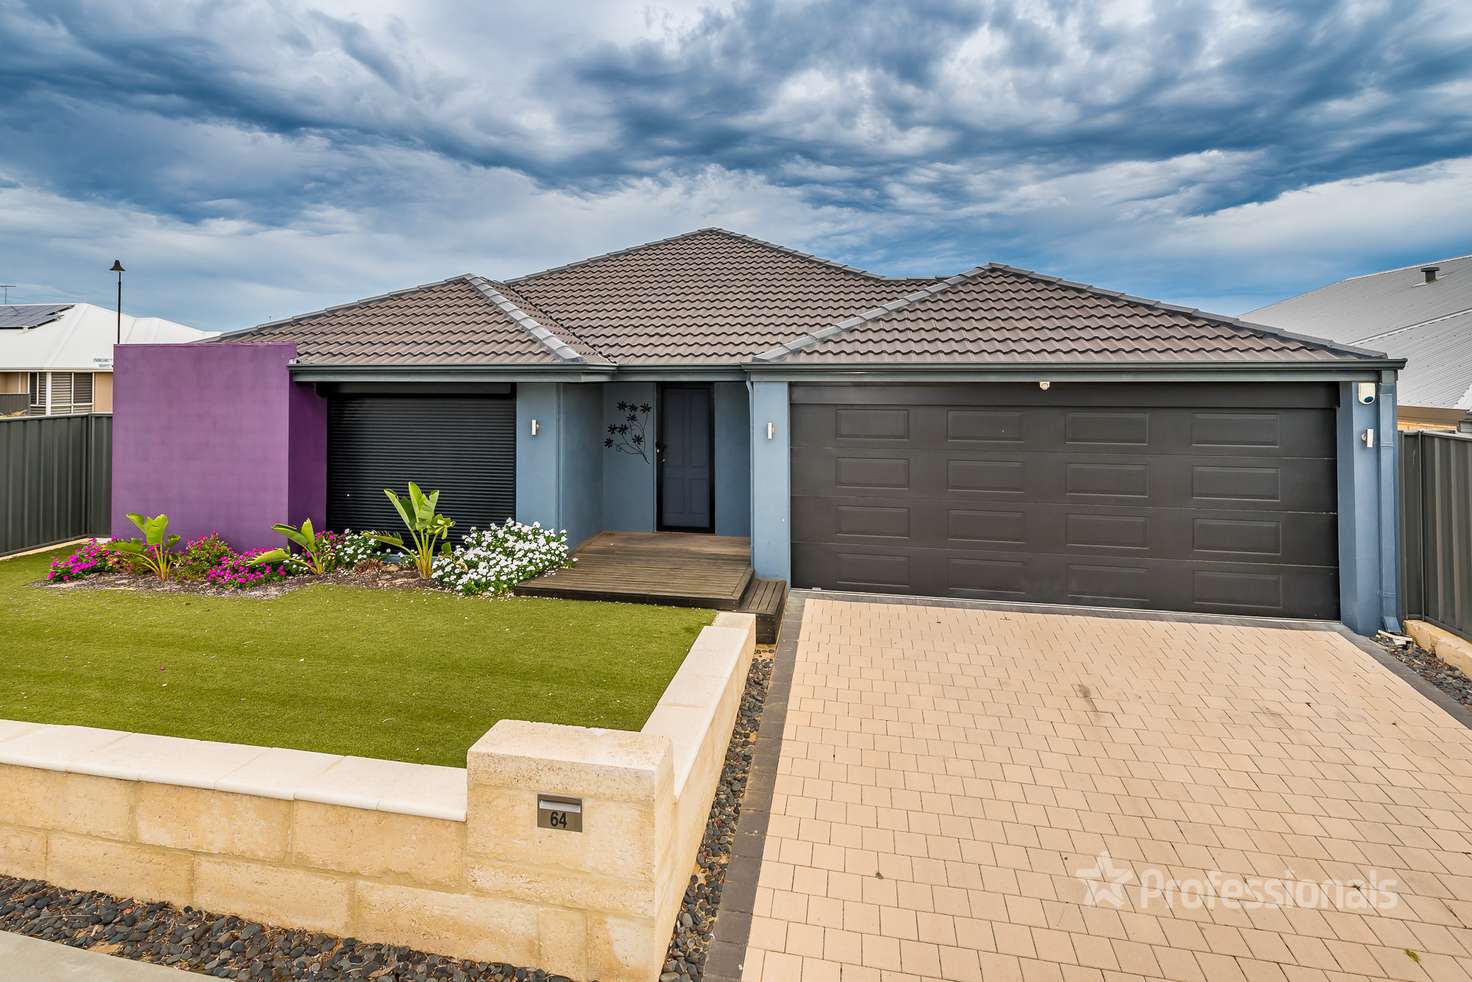 Main view of Homely house listing, 64 Bunker Crescent, Yanchep WA 6035